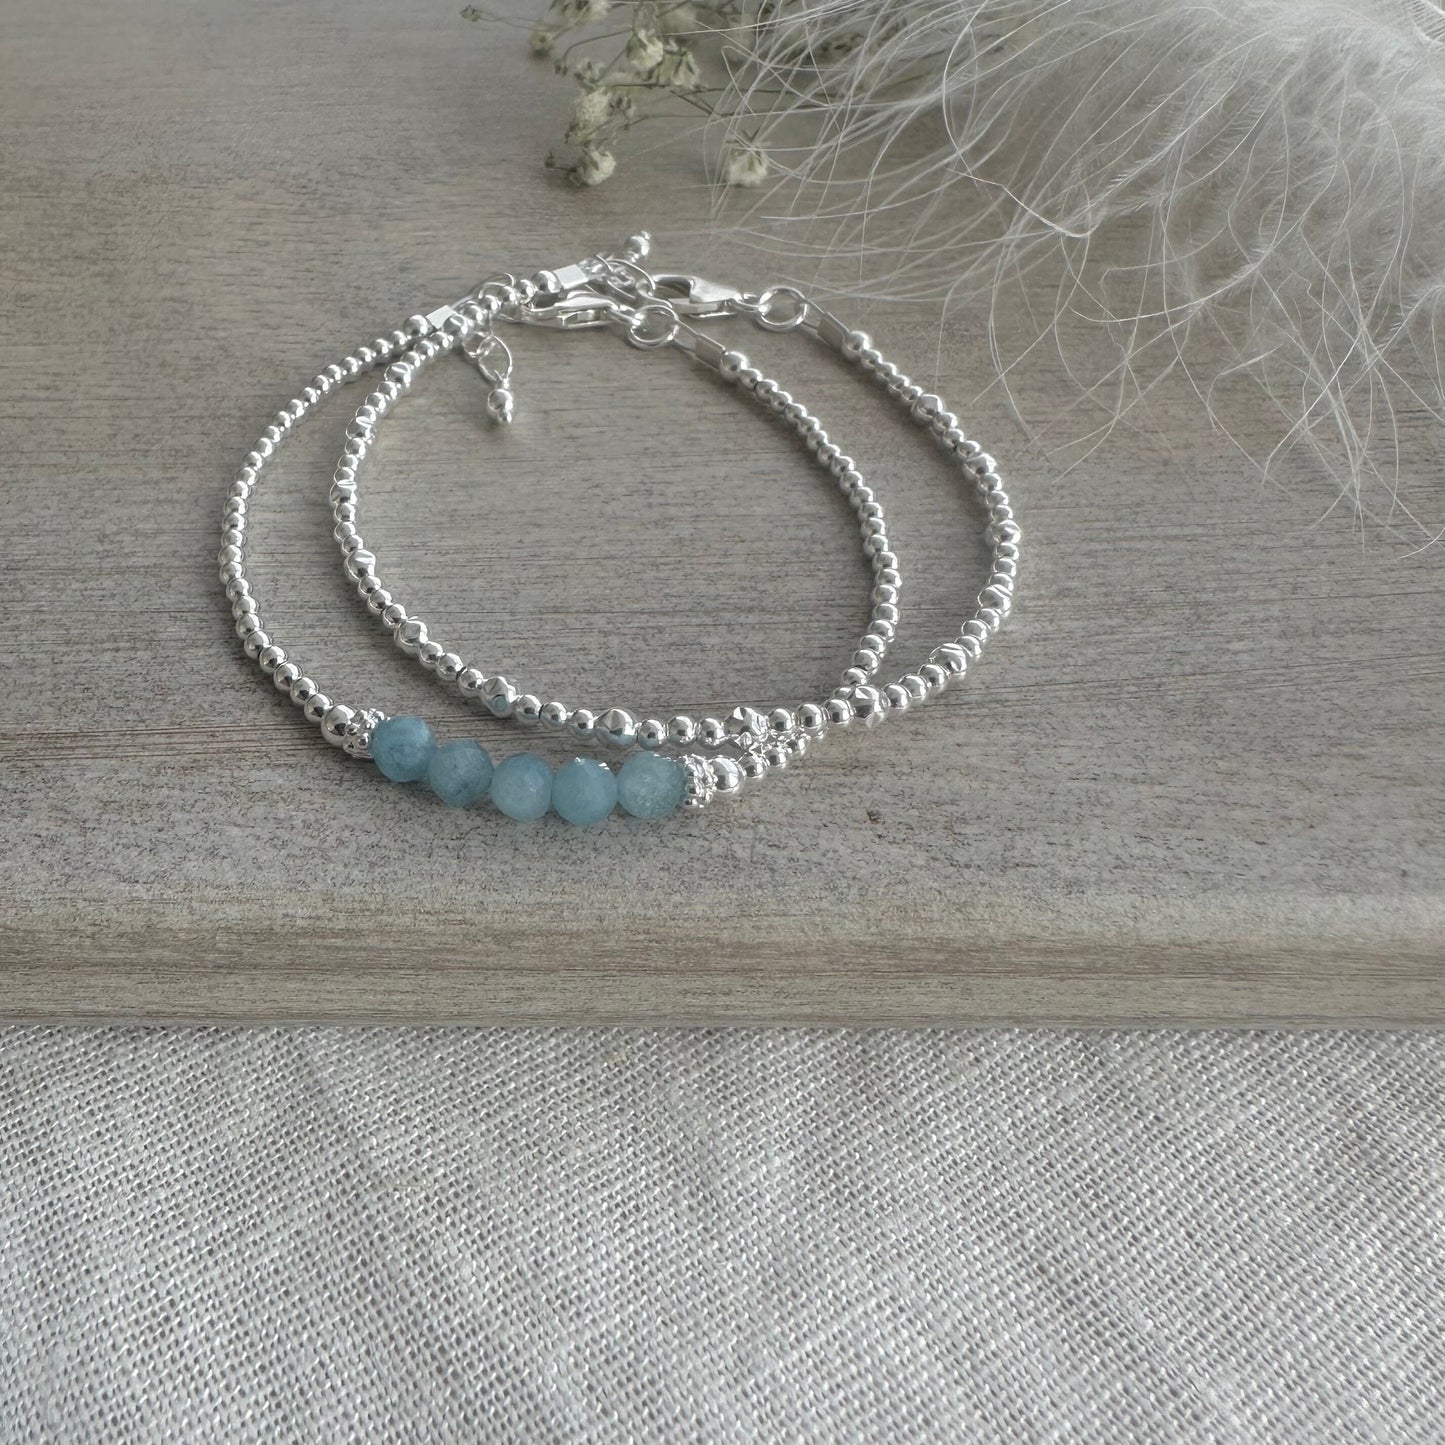 Two Stacking Bracelet Set with aquamarine, March Birthstone